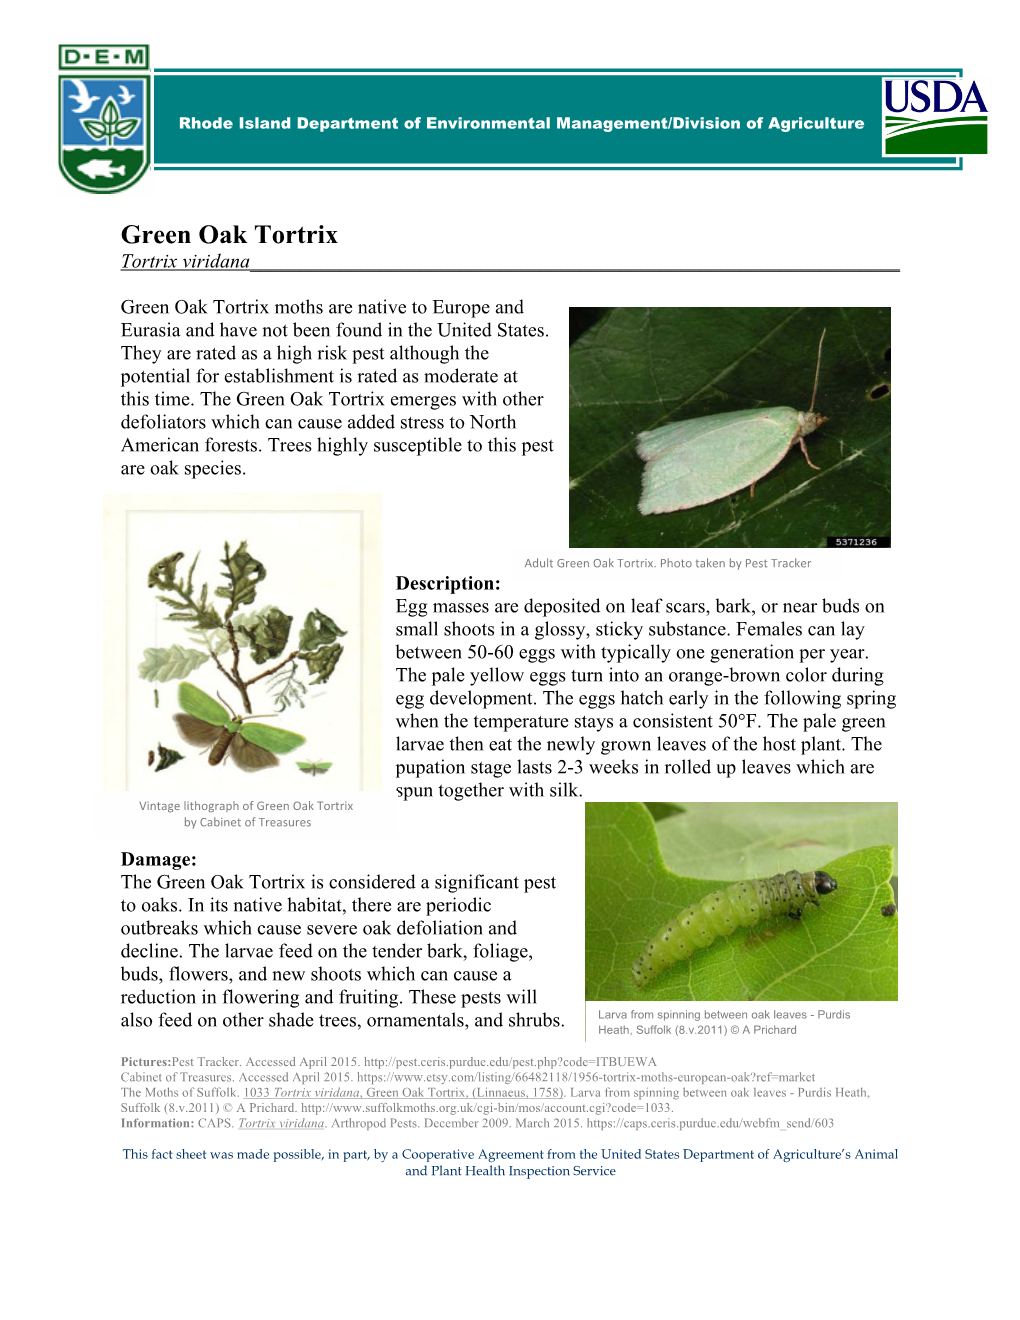 Green Oak Tortrix Moths Are Native to Europe and Eurasia and Have Not Been Found in the United States